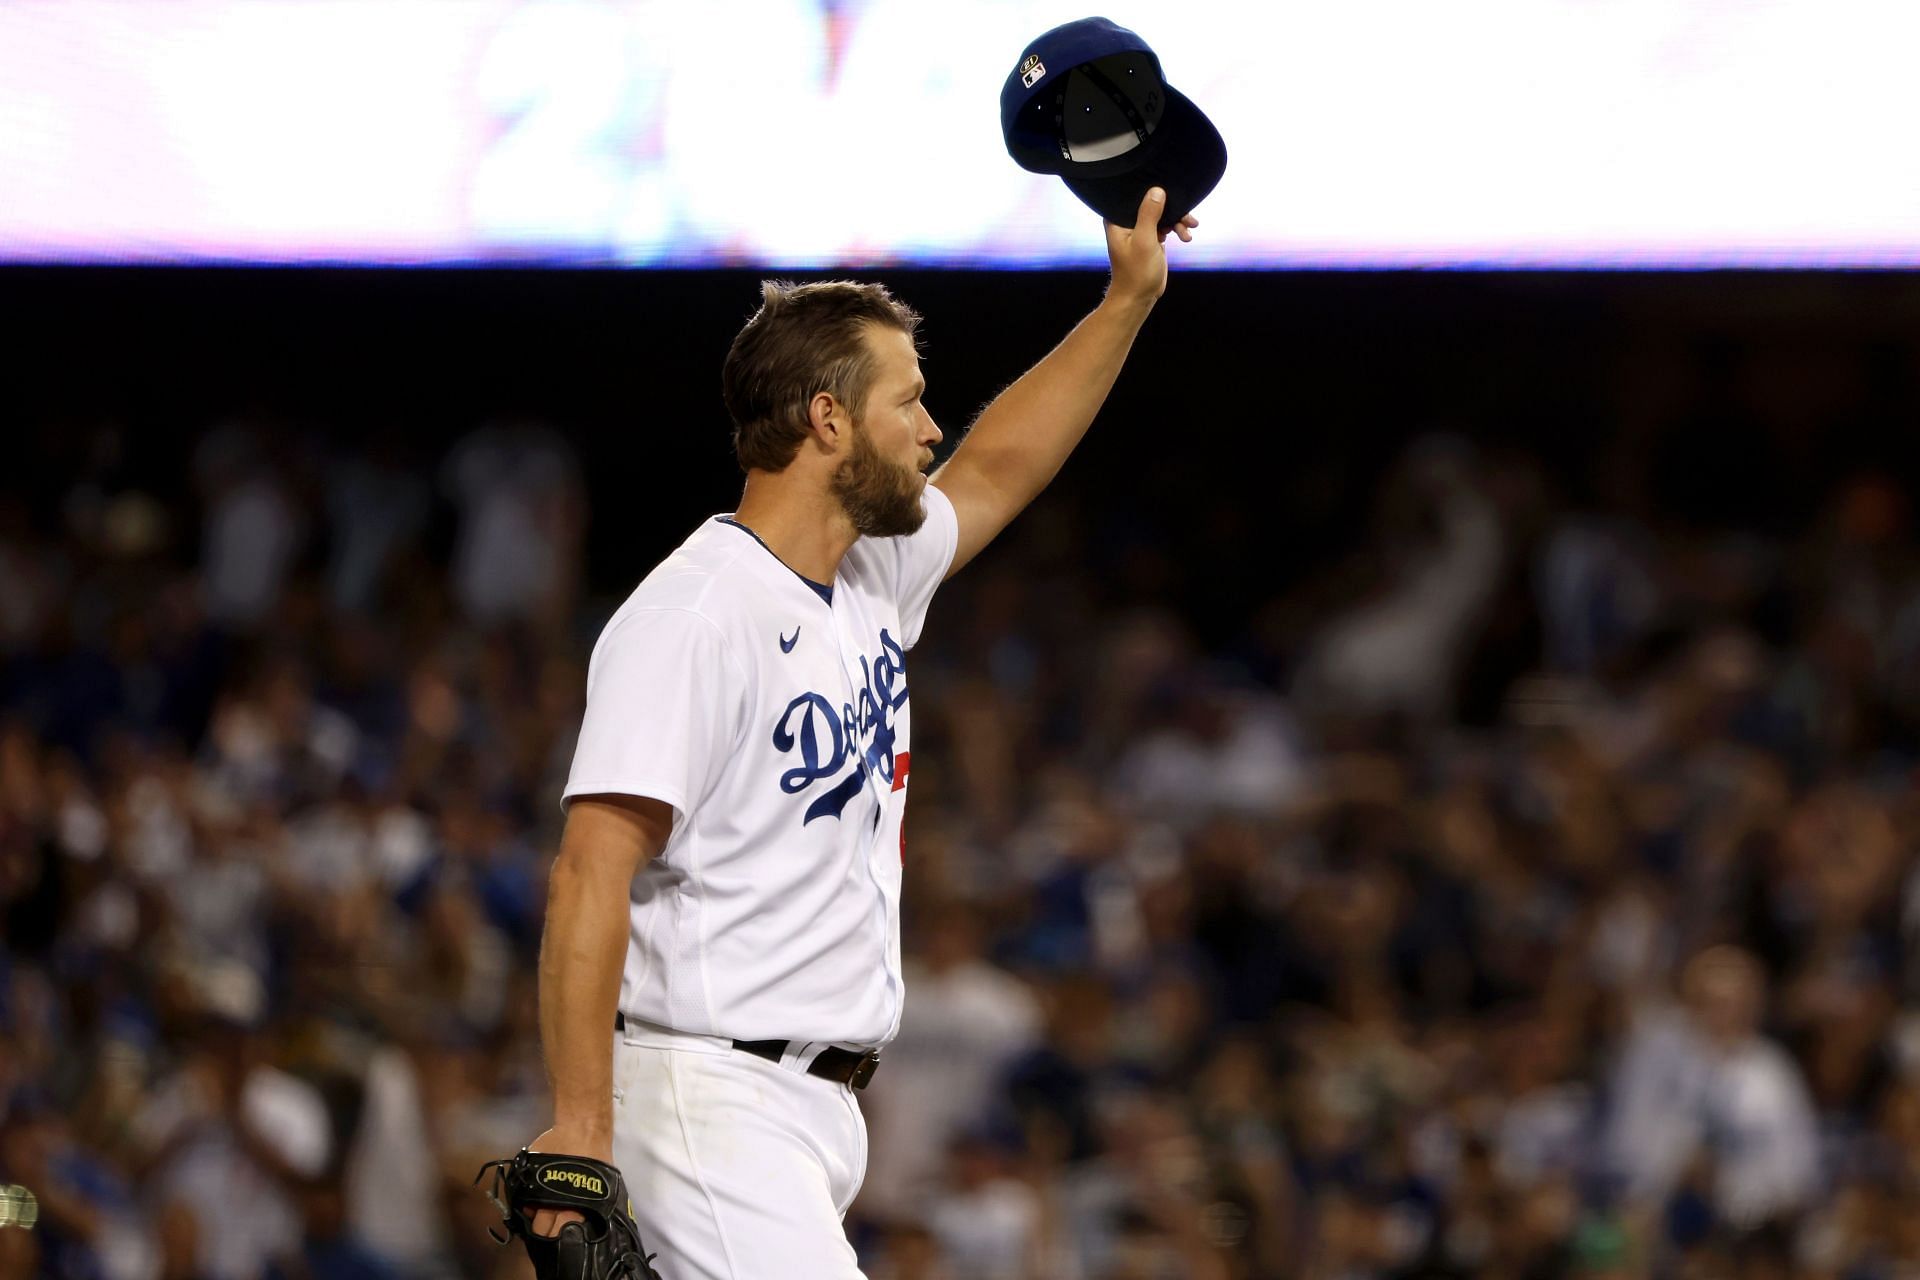 Clayton Kershaw made history last night, setting the franchise record for most strikeouts. 